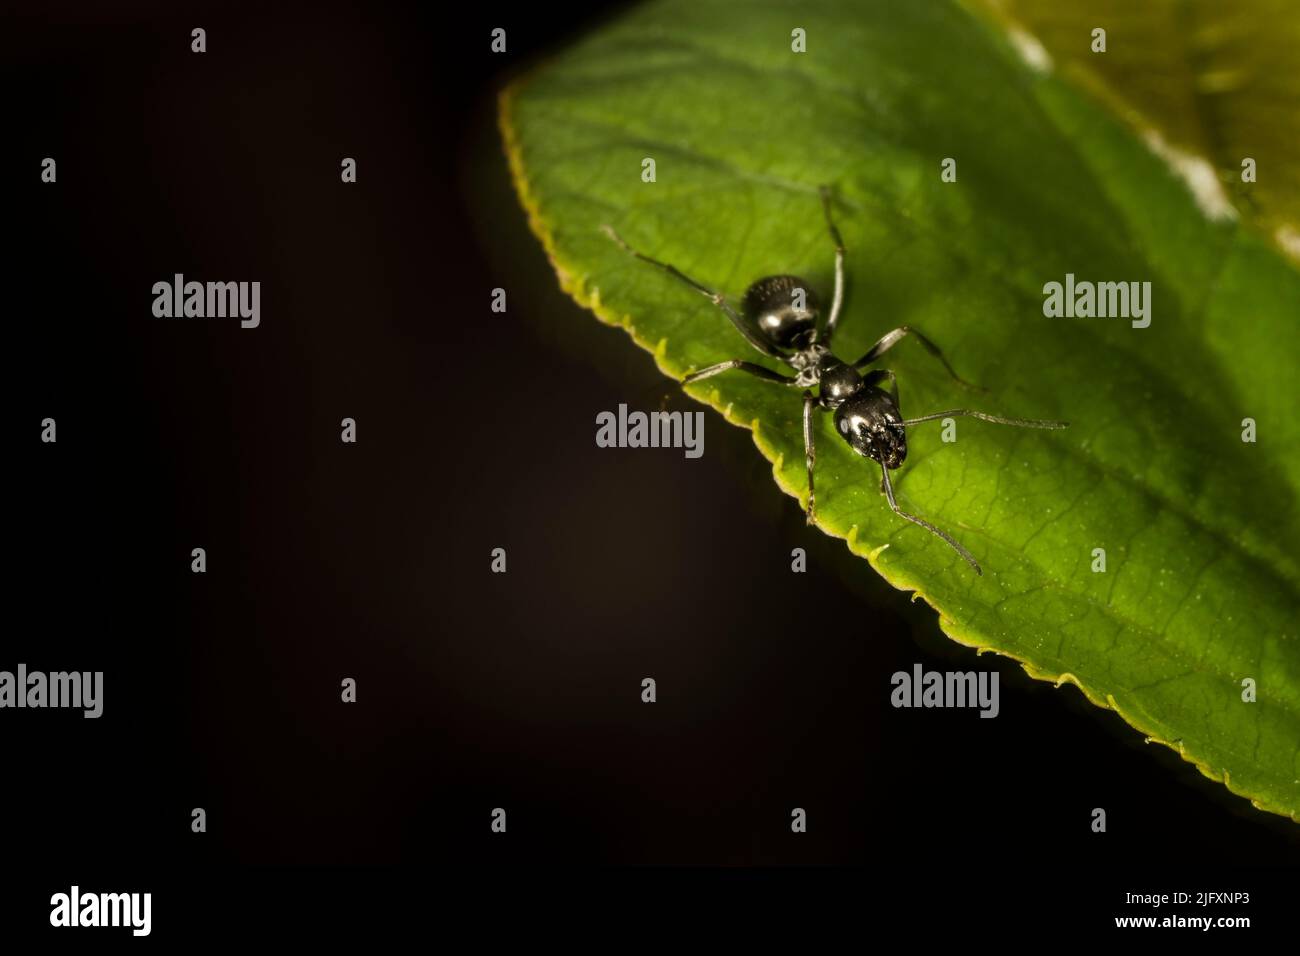 Close-up of a Black carpenter ant going from leaf to leaf in a backyard Stock Photo